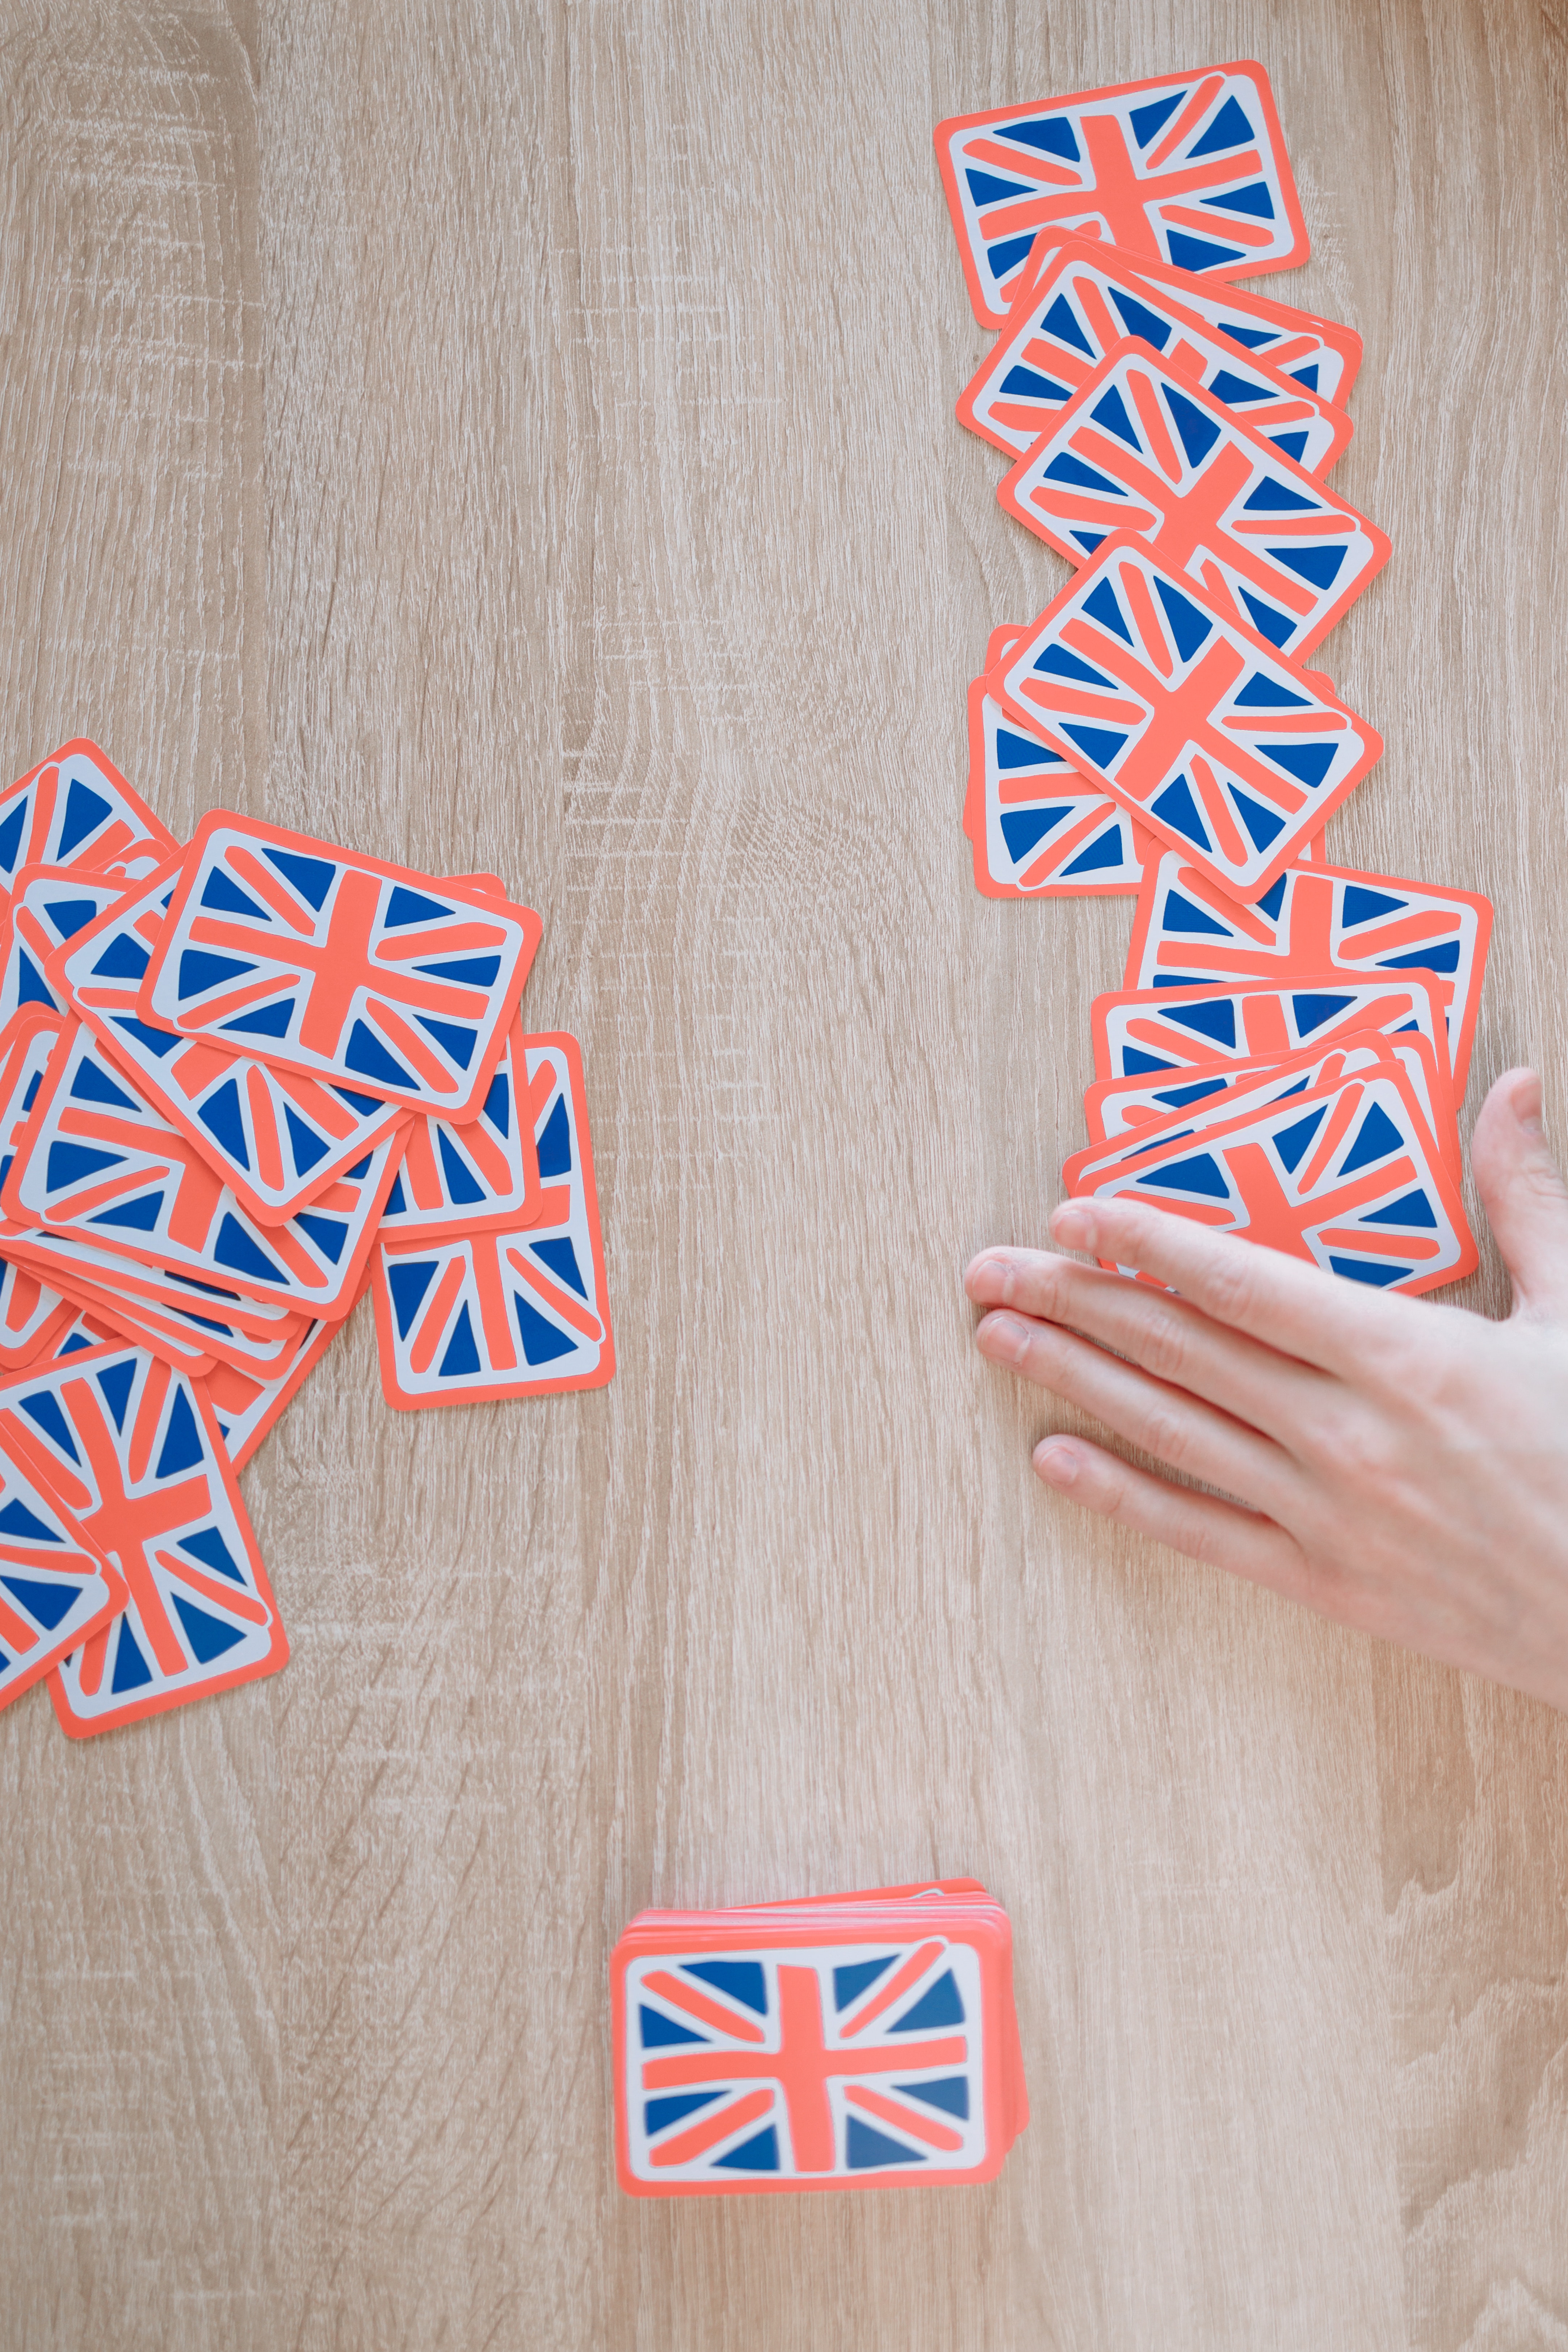 What to know if you want to play online casinos in the UK